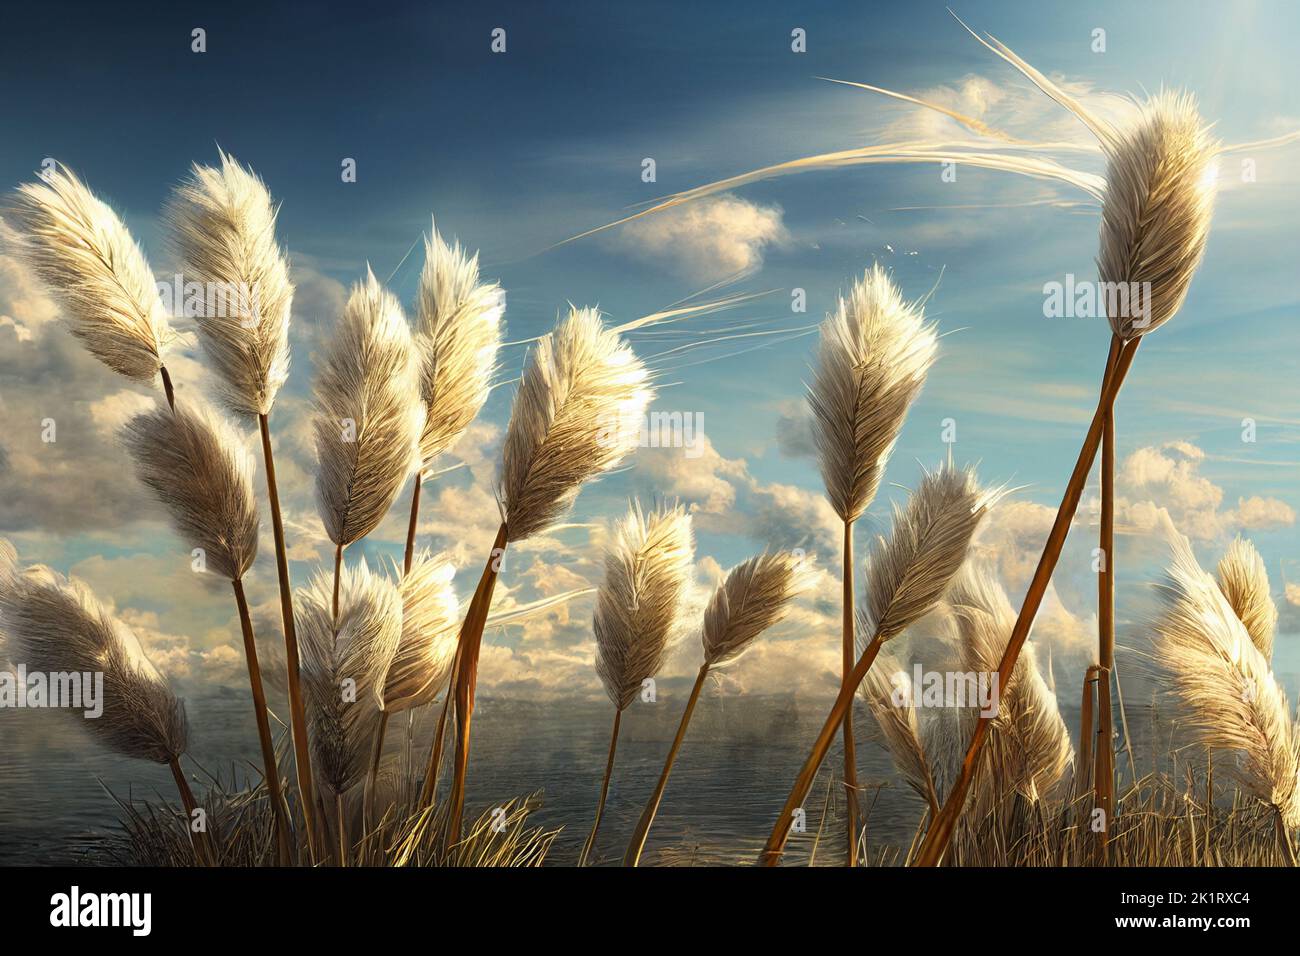 Reed Swaying in the Wind, Digital Generate Image Stock Photo